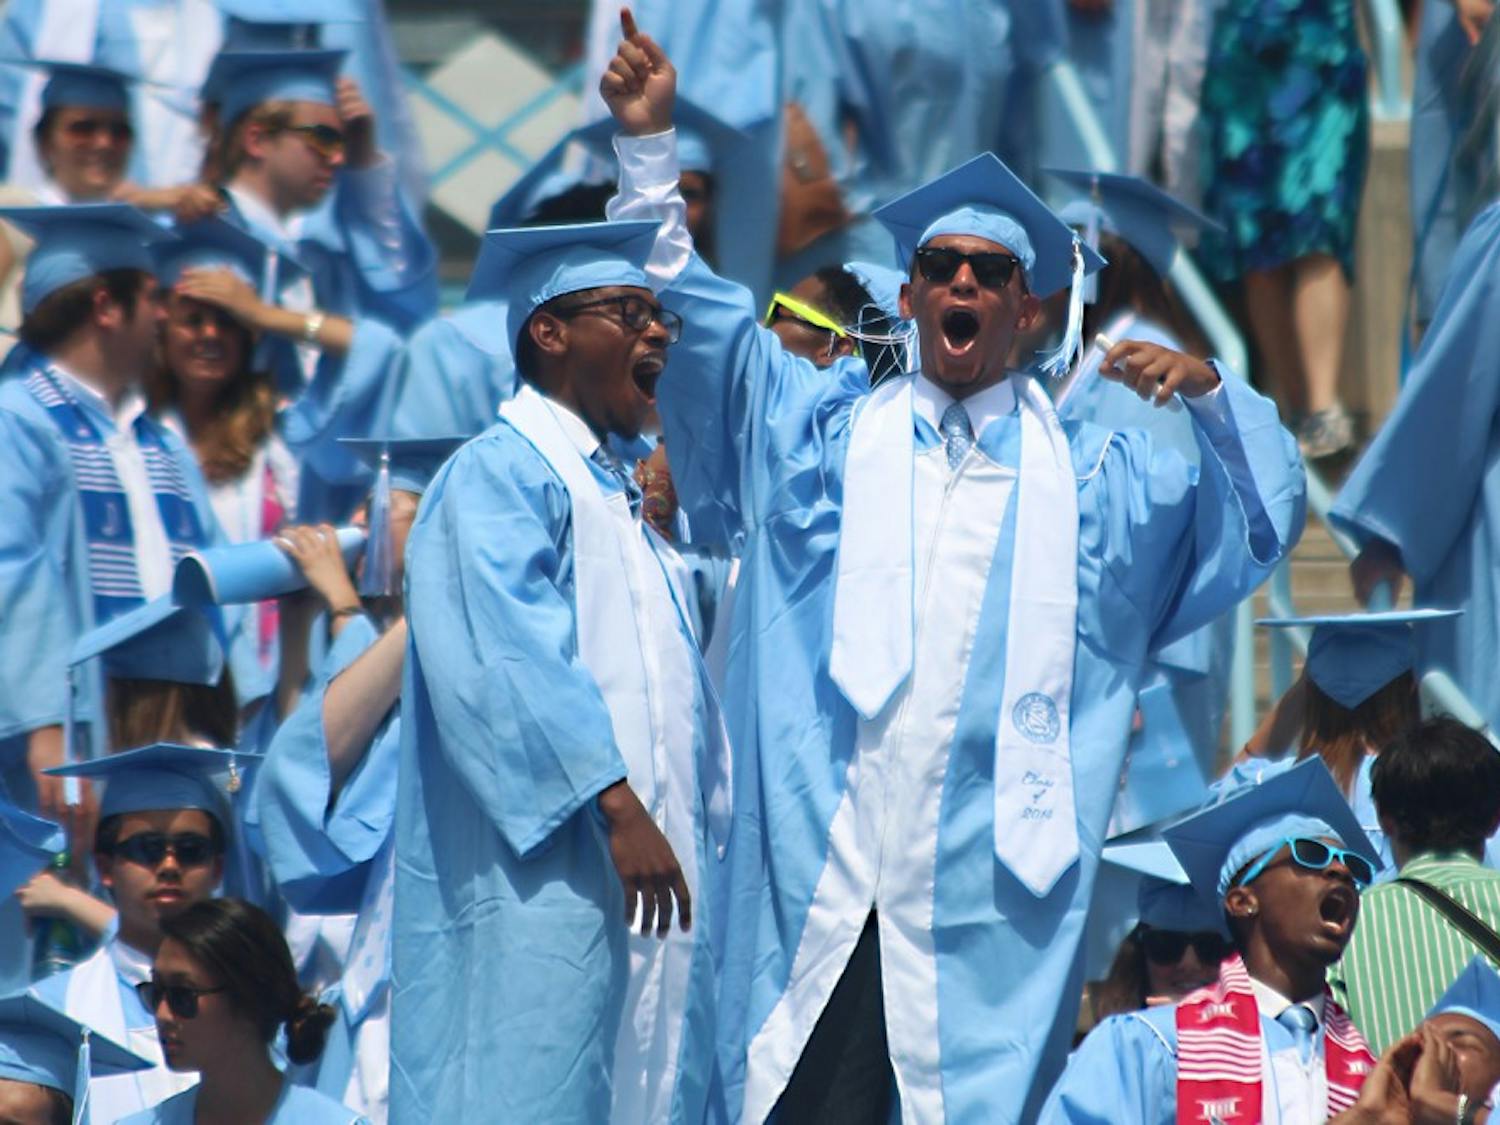 Graduation hosted 33,000 people on Sunday afternoon in order to honor degree earning students of the University of North Carolina at Chapel Hill. 